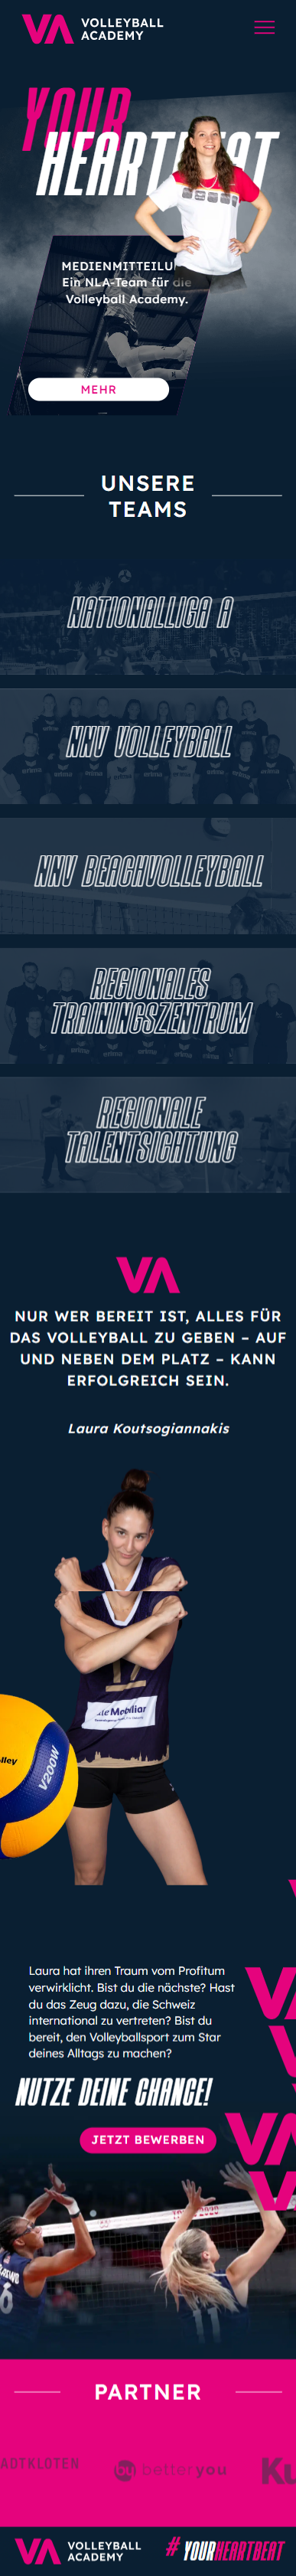 Volleyball Academy Mobile